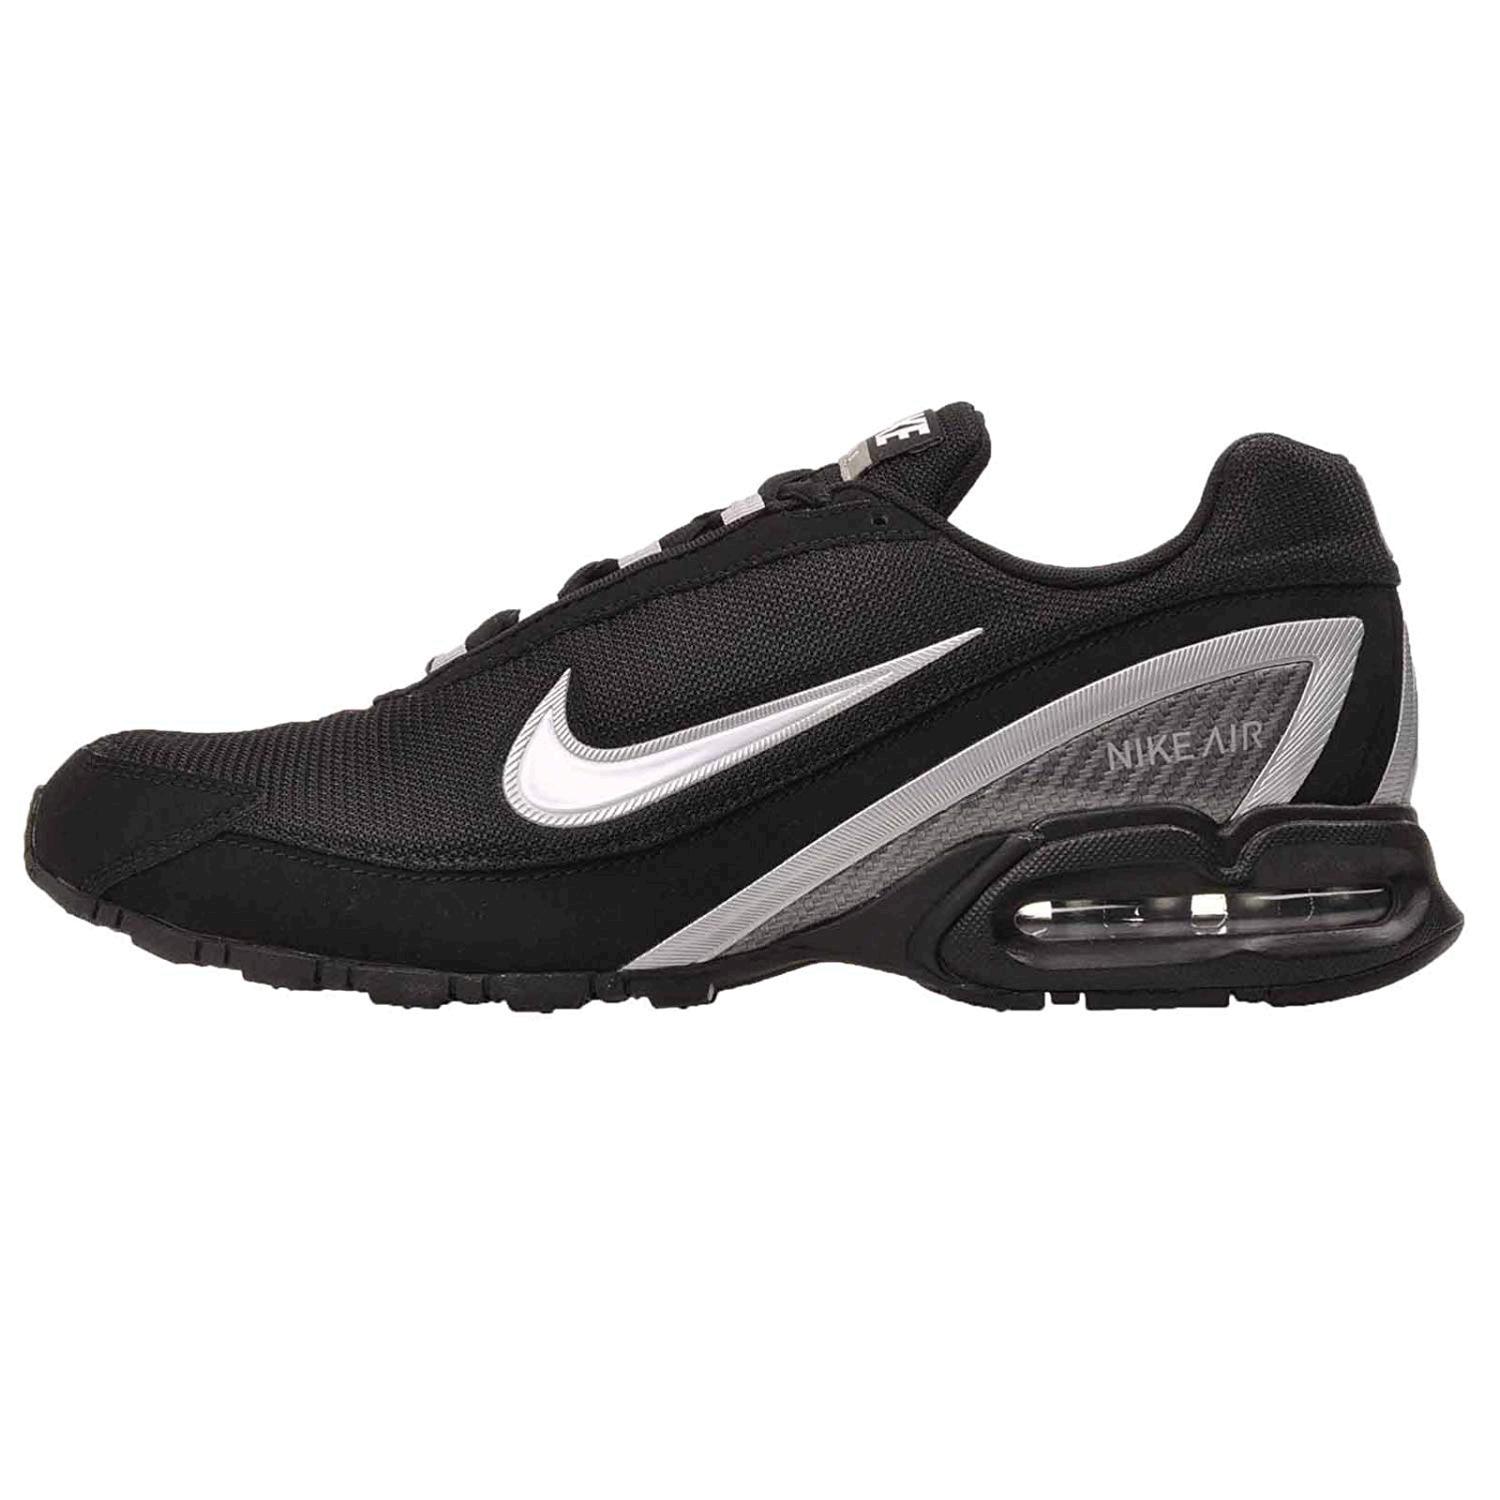 Nike Air Max Torch 3 Men's Running Shoes, Black/White, Size 12.5 P84l ...